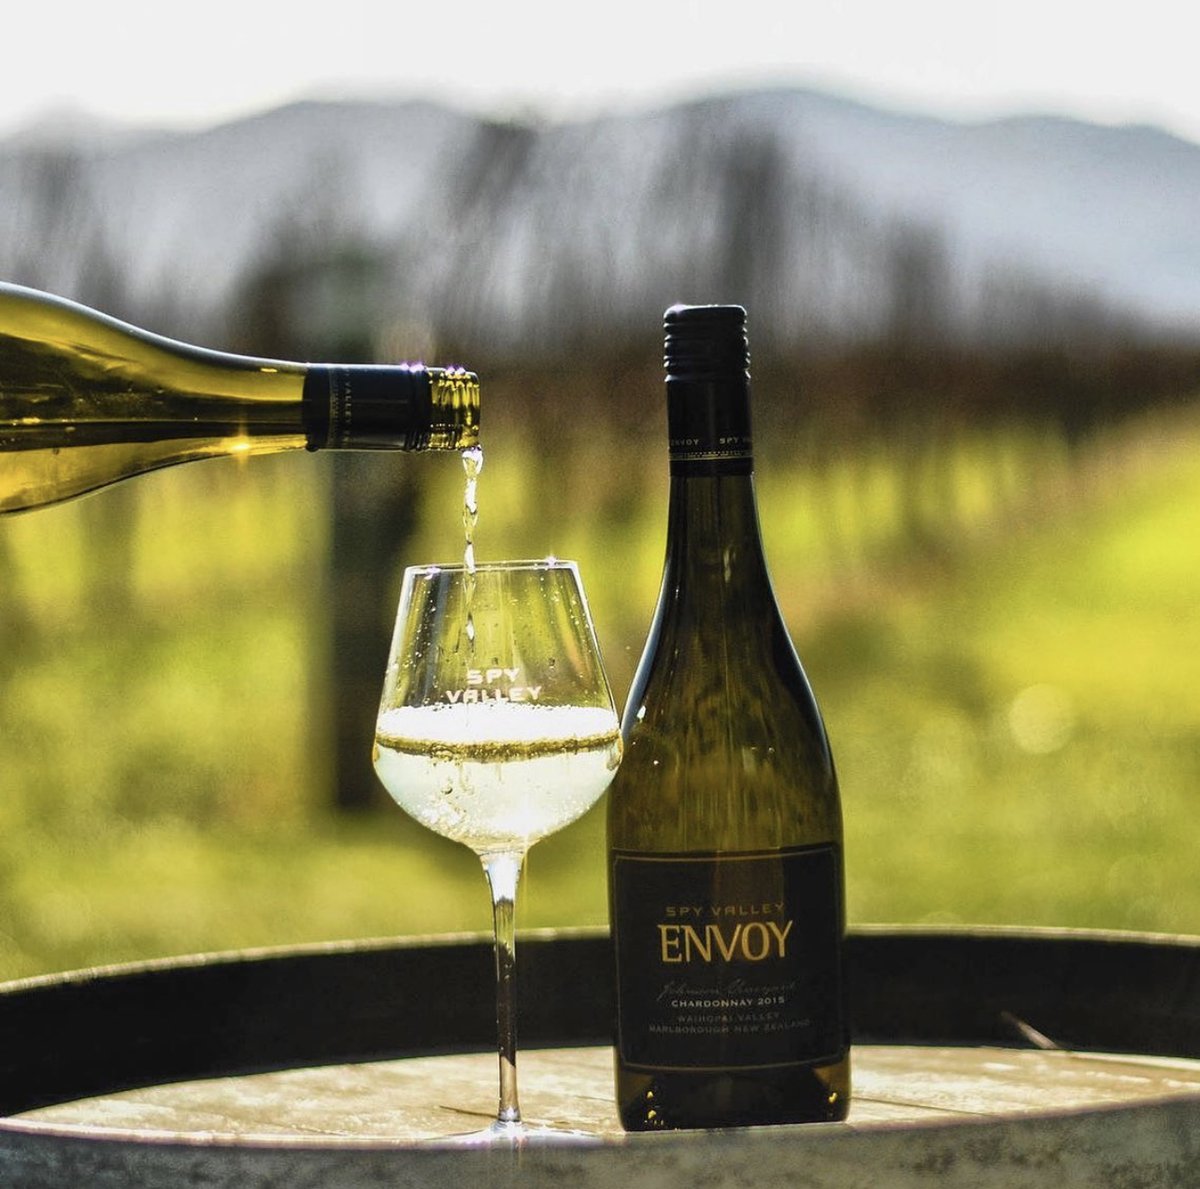 Scored 96 Points! The Spy Valley Envoy Sauvignon Blanc 2016 is all about freshness and vibrancy, boasting hints of citrus and fragrant herbs. It's the perfect match for your go-to salad📷 Grab yours through LCBO Vintages and get sipping!